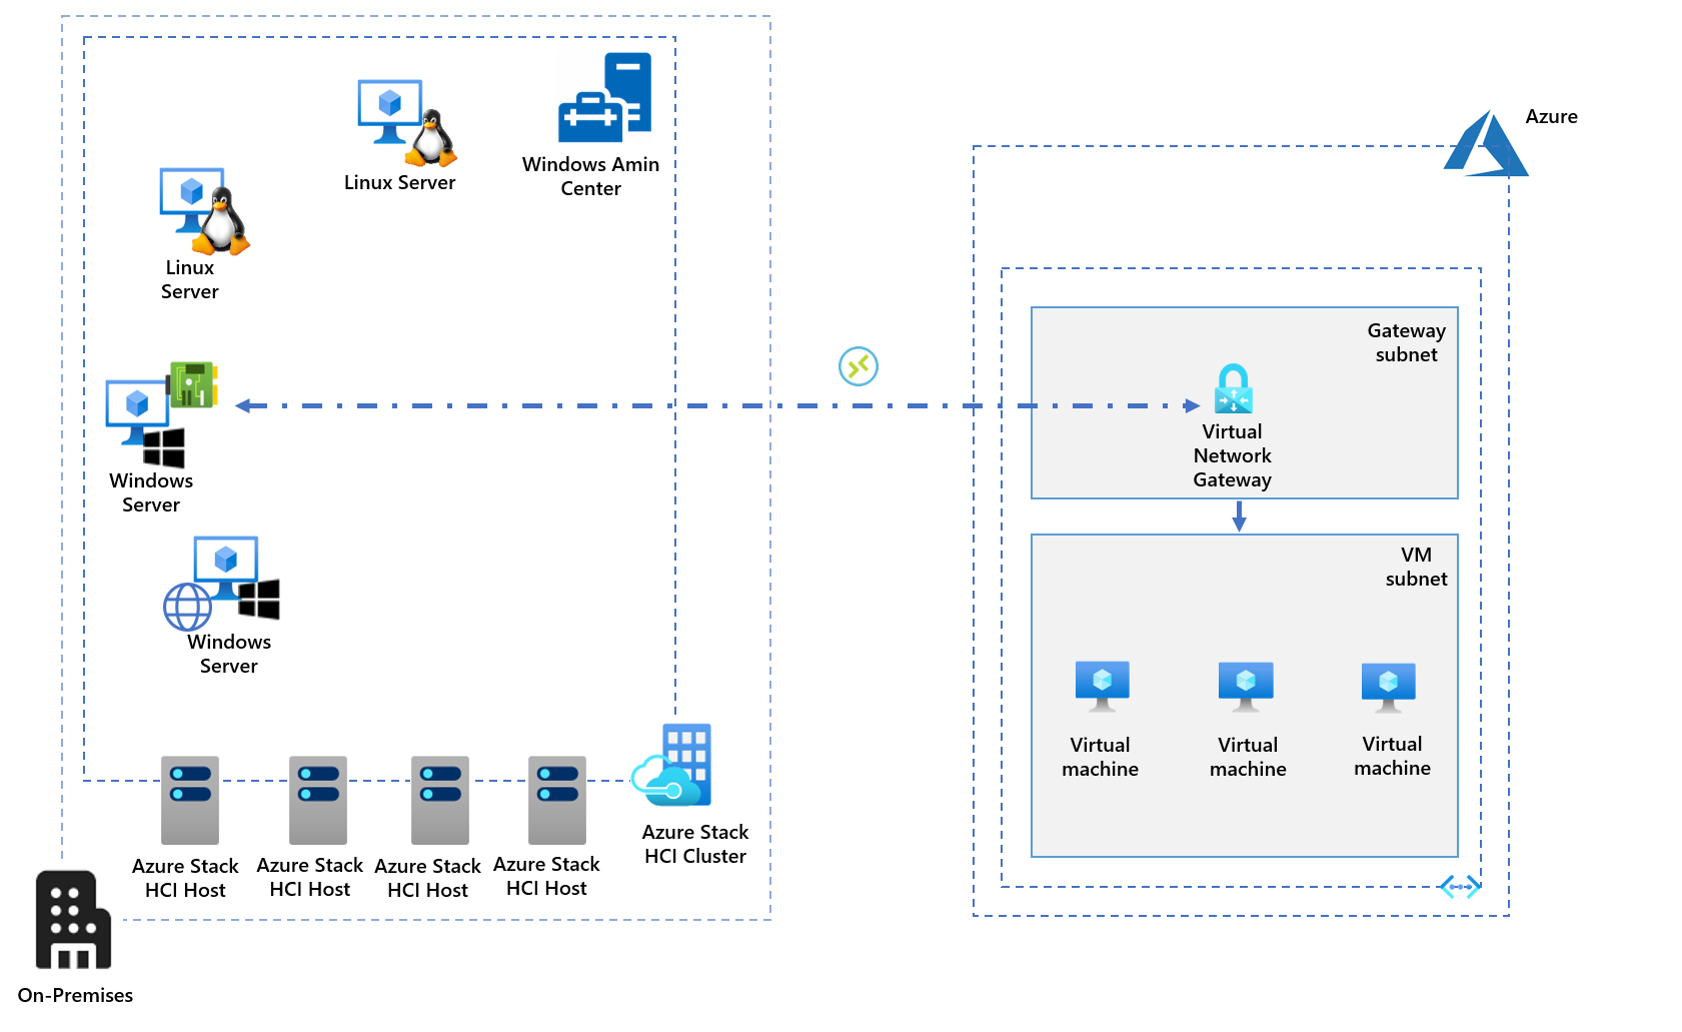 The diagram depicts how Azure Network Adapter uses locally installed software to connect to an Azure virtual network gateway, which resides in the dedicated Gateway subnet of the target Azure virtual network. There is no additional on-premises infrastructure. Azure Network Adapter uses the VPN capabilities built into the Windows Server operating system.